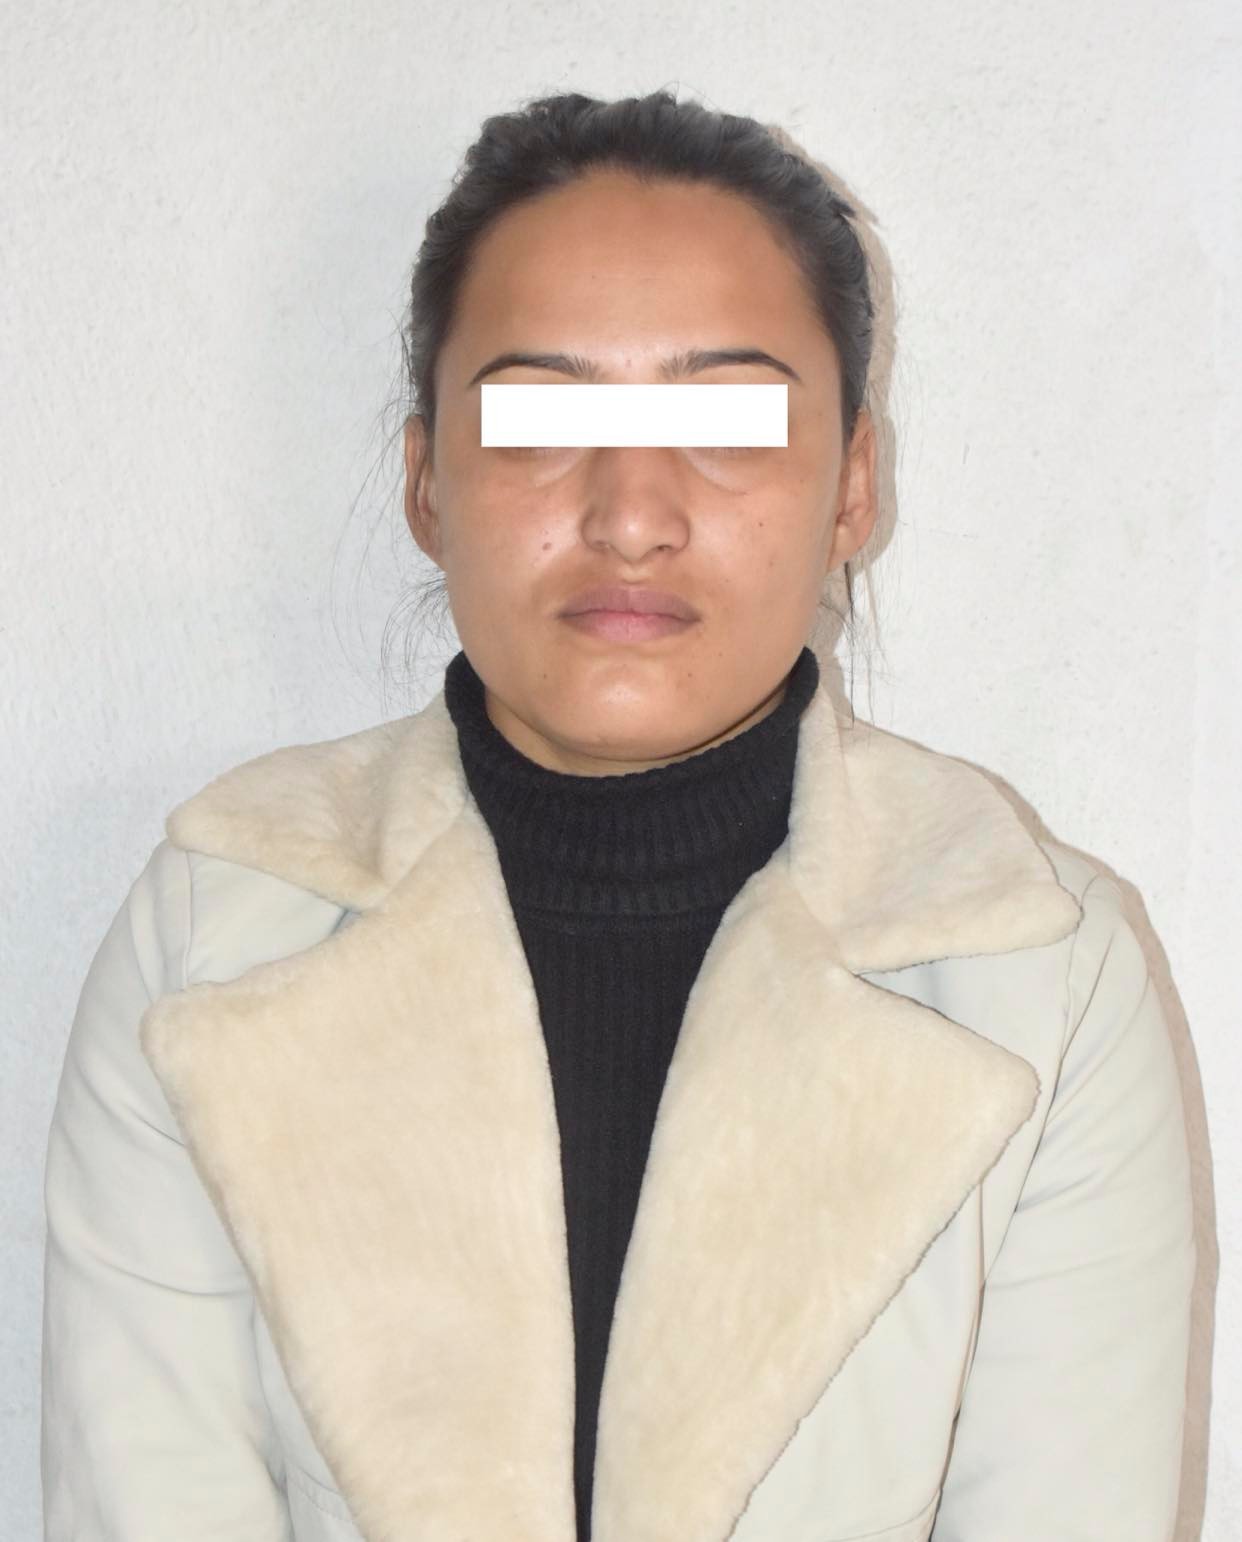 Police nab woman for defrauding Rs 2 million by giving false assurance of freeing Chinese national held on rape charge